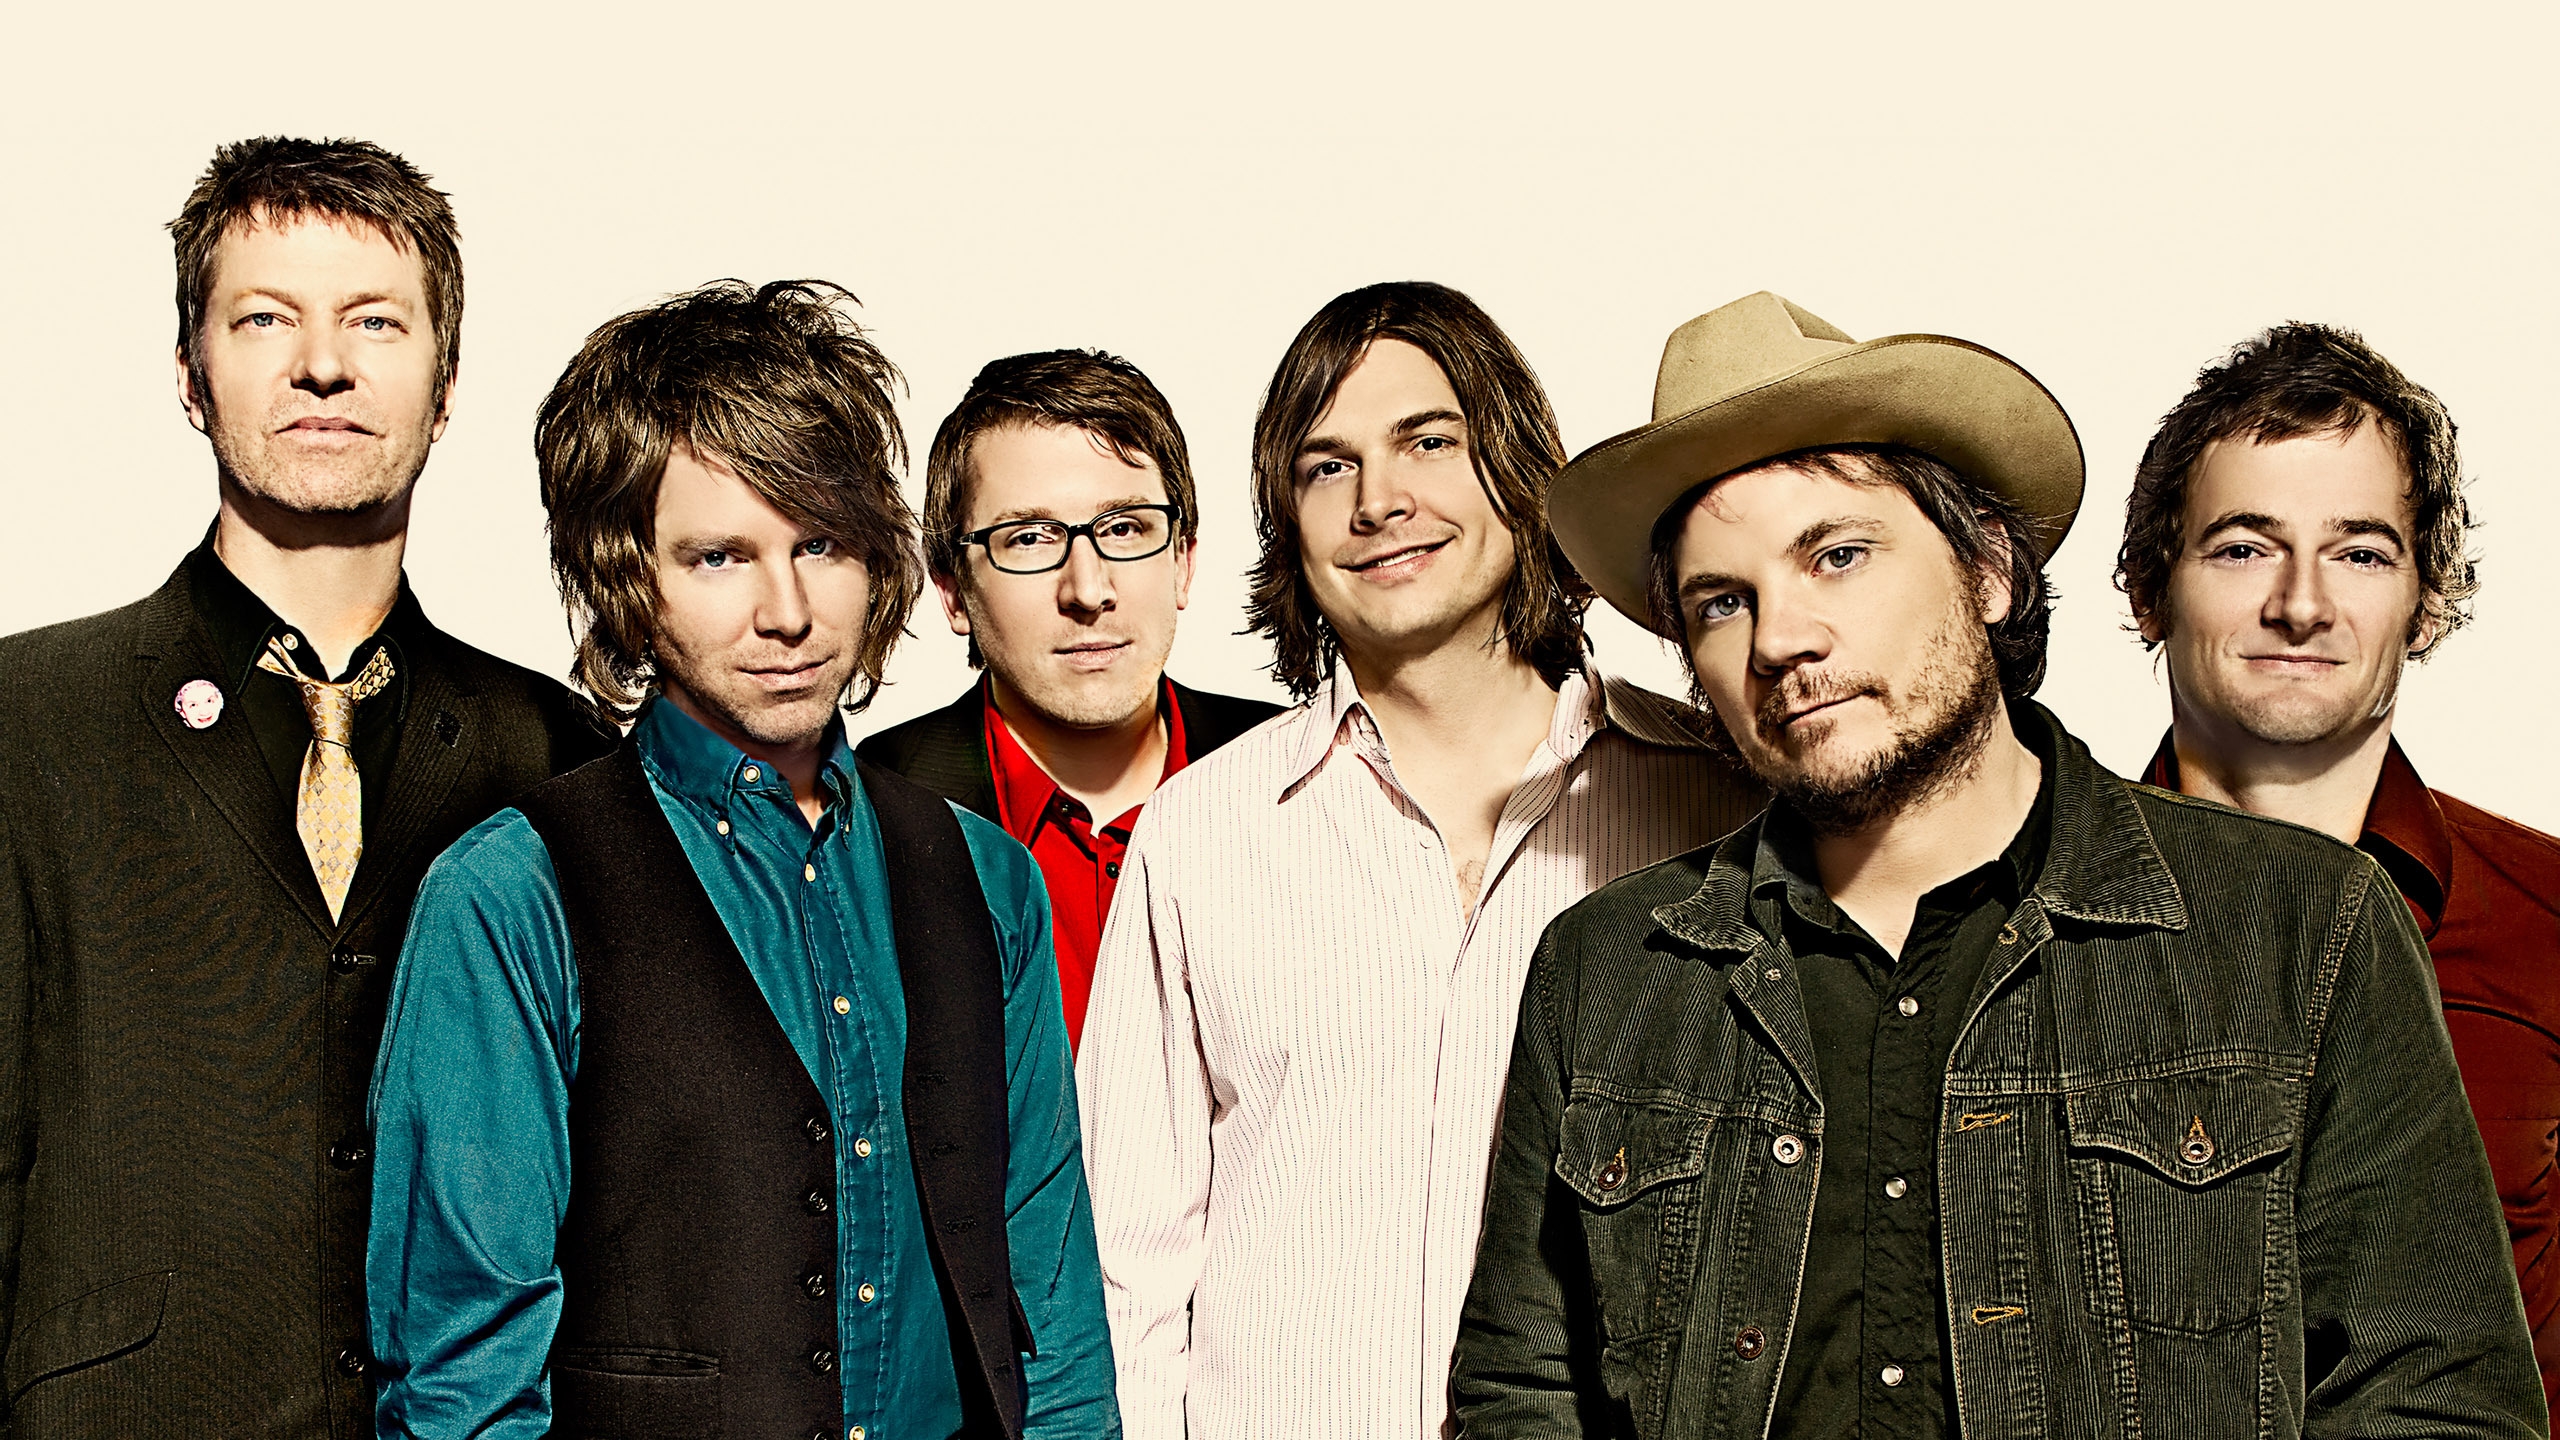 Wilco Band for 2560x1440 HDTV resolution